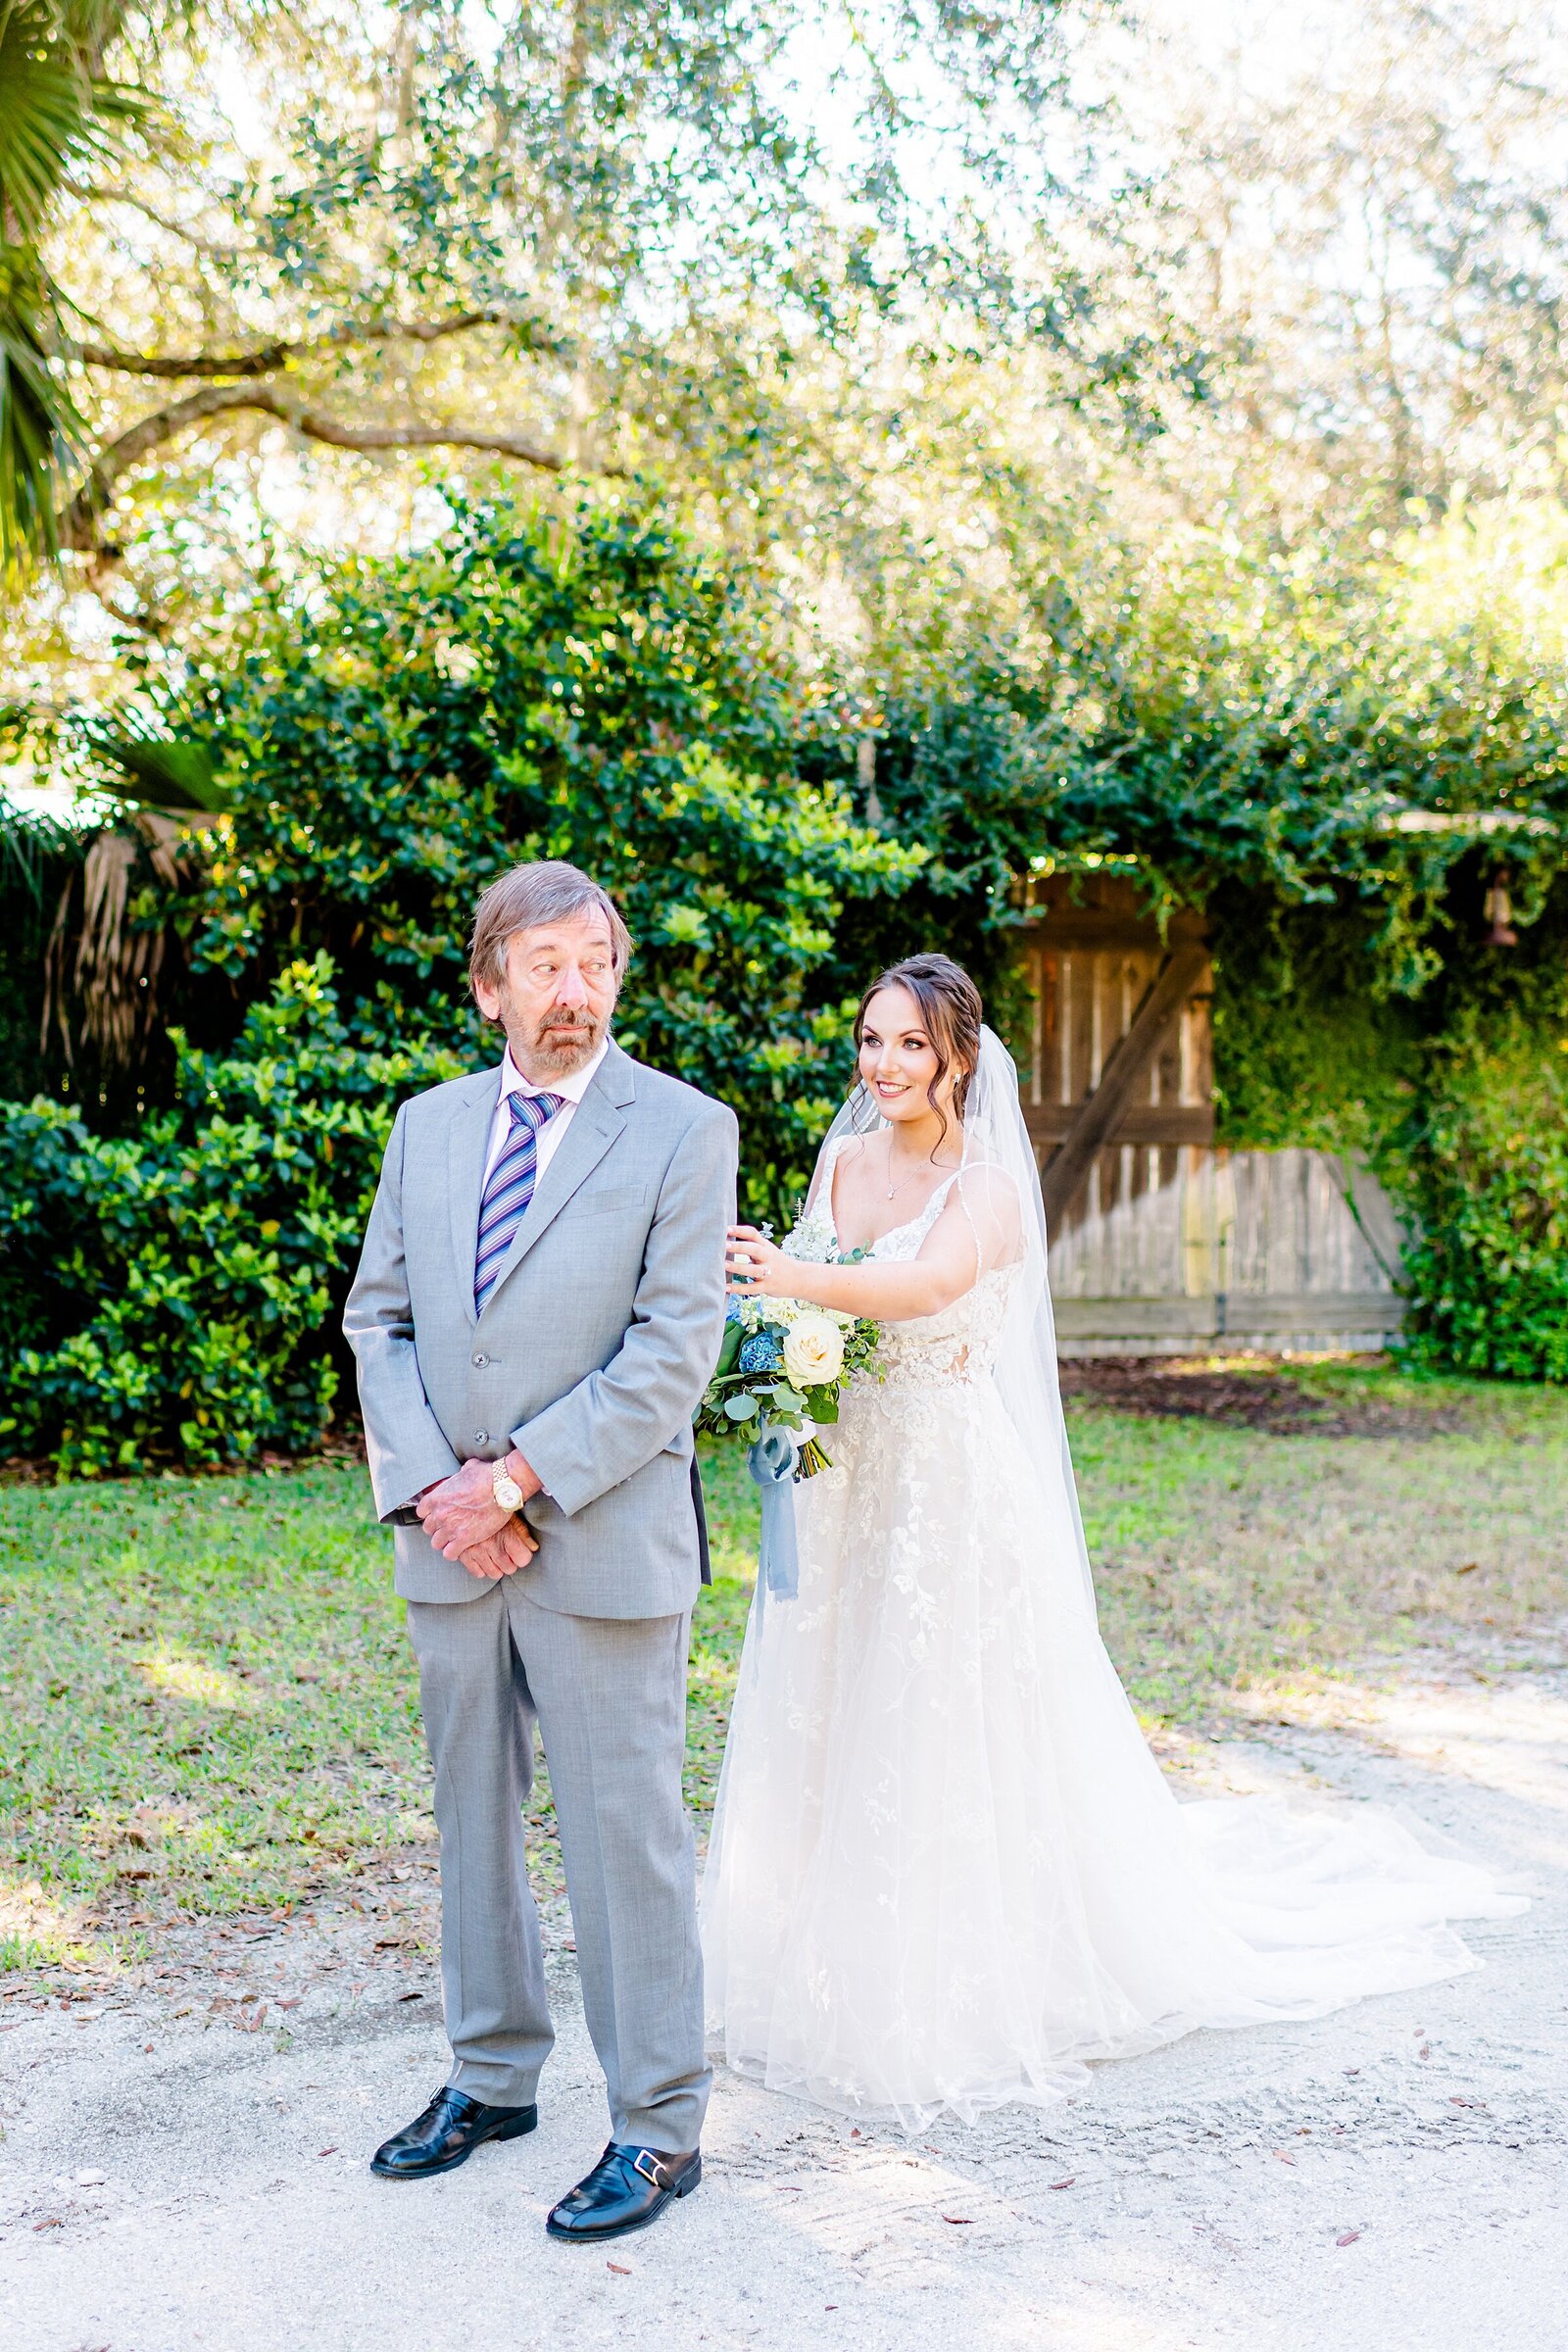 First Look with Dad | The Delamater House Wedding | Chynna Pacheco Photography-379